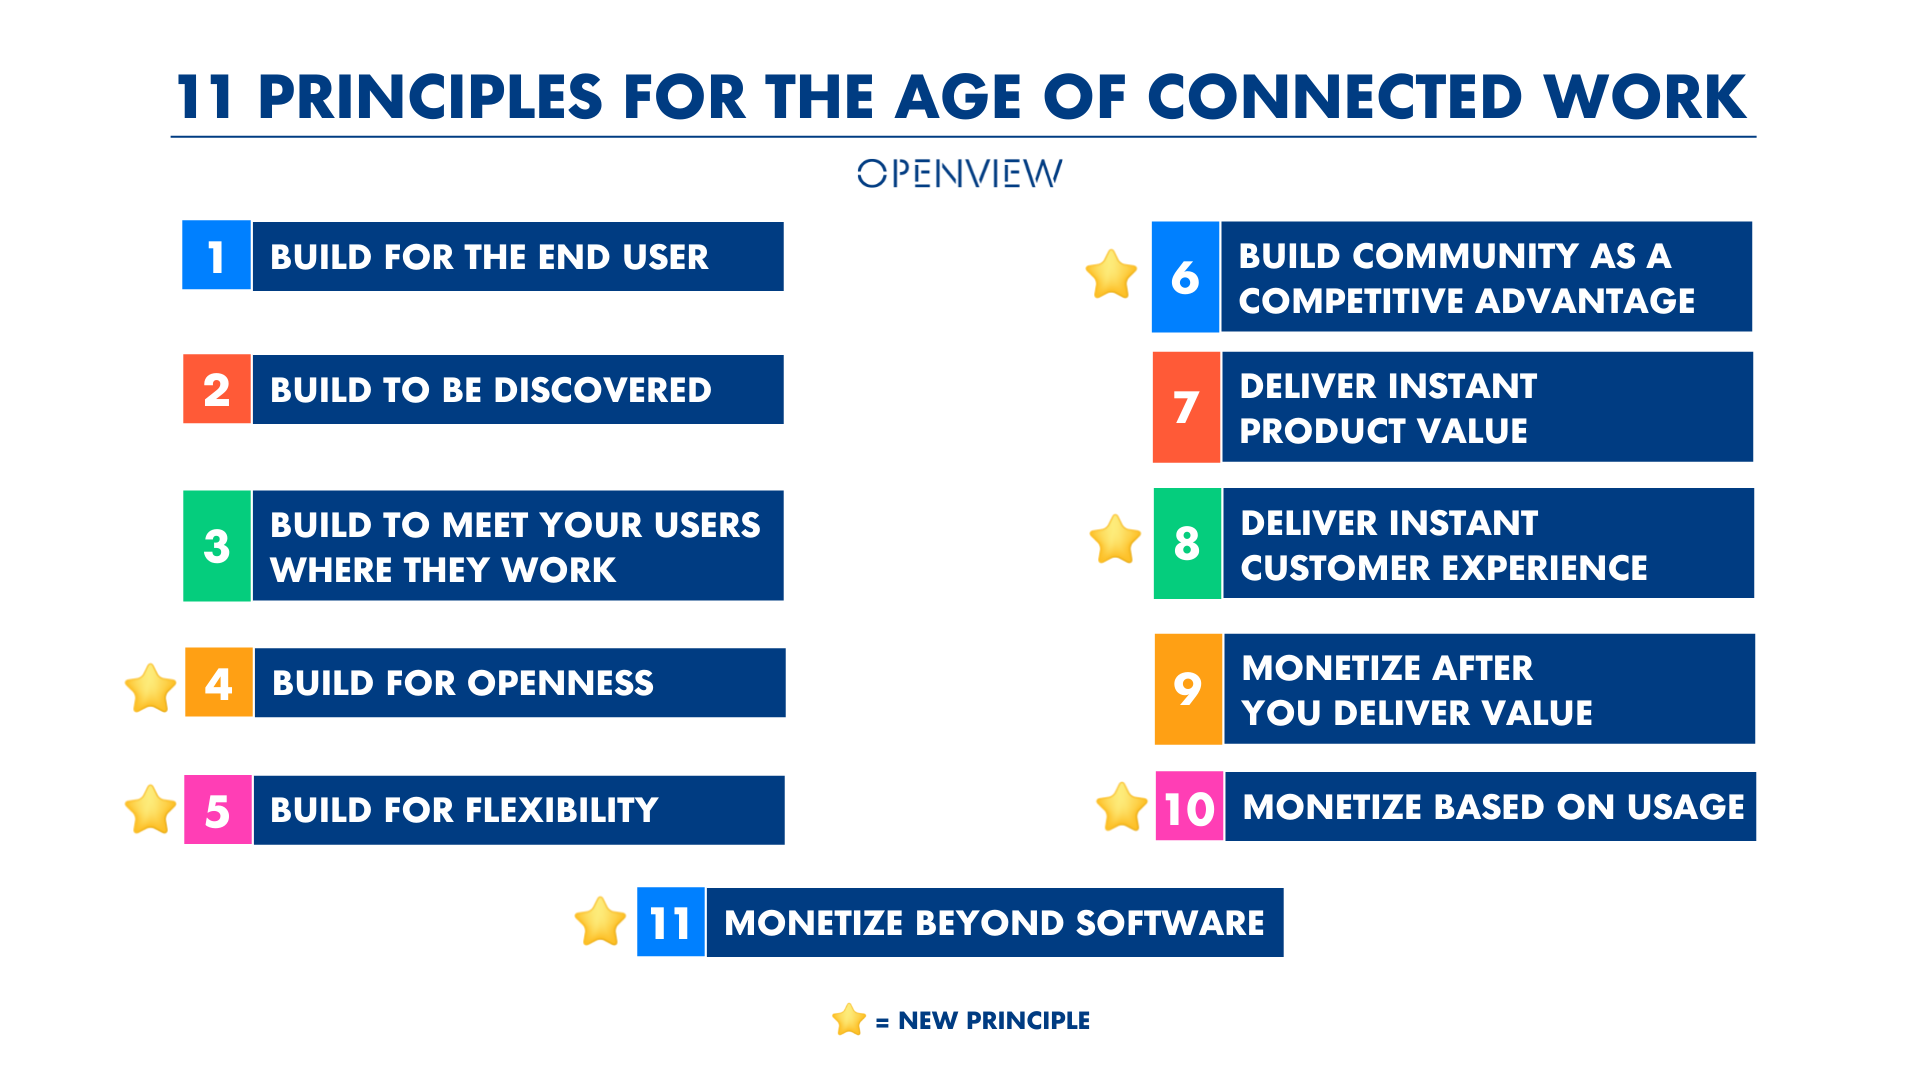 OpenView's 11 Principles for the Age of Connected Work